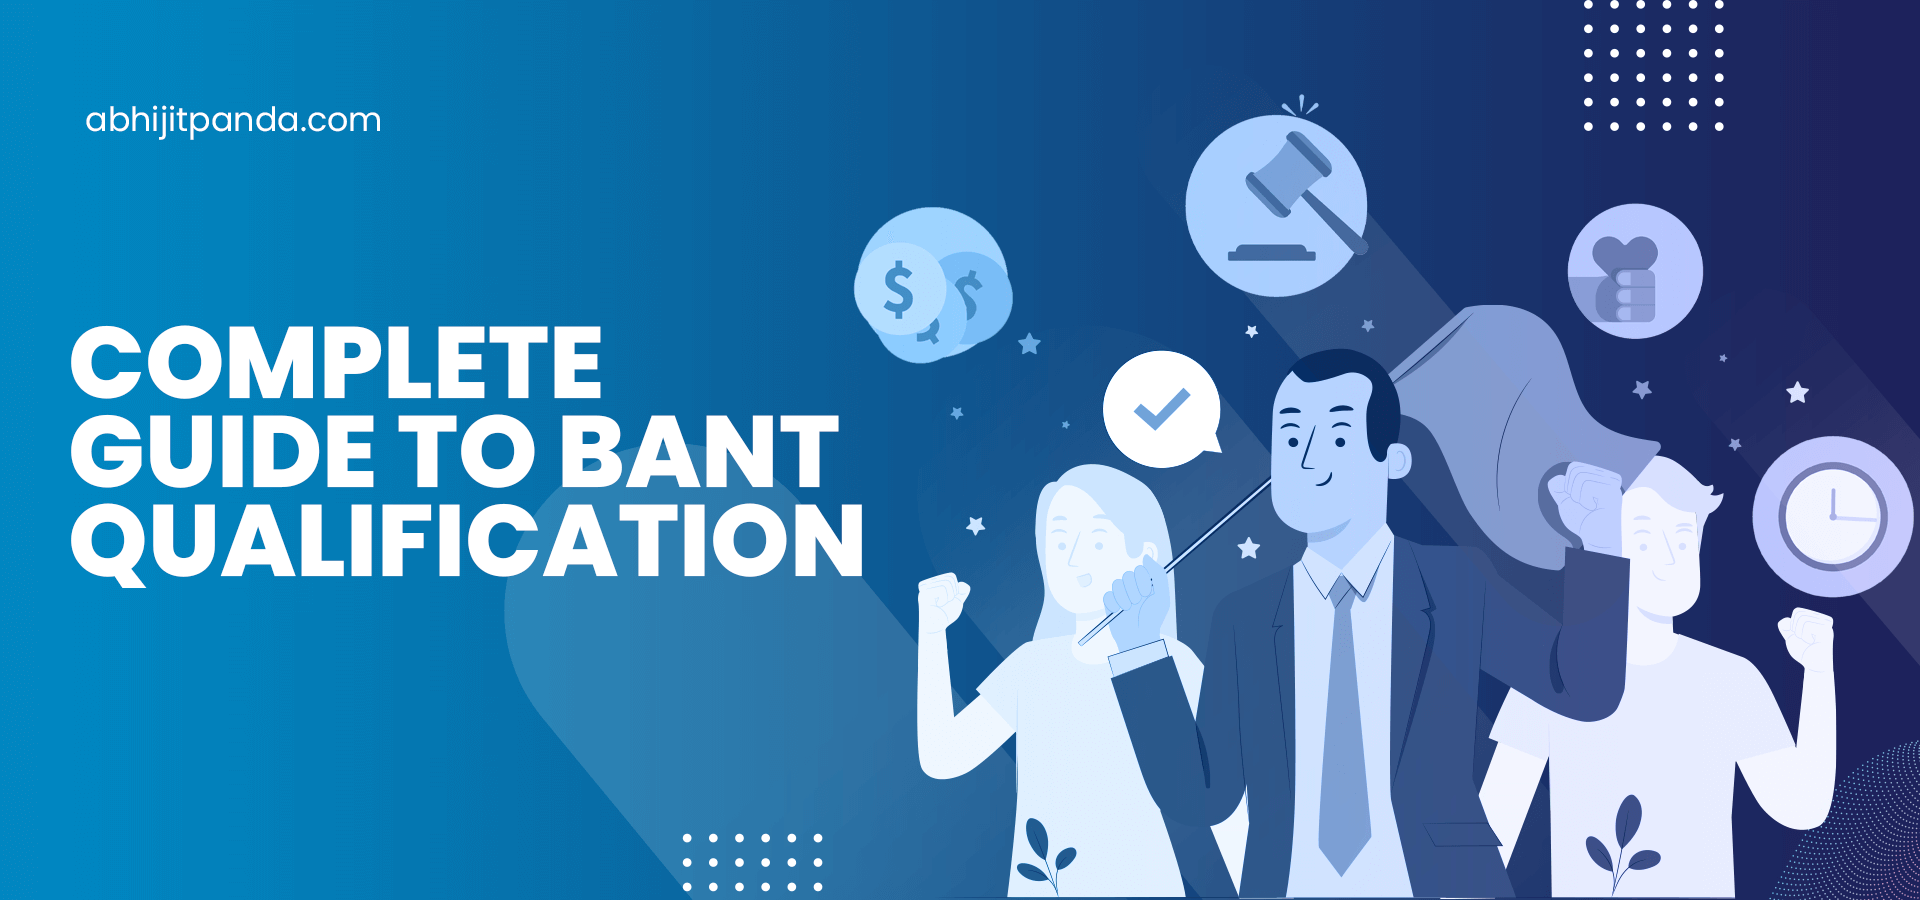 Complete Guide to BANT Qualification